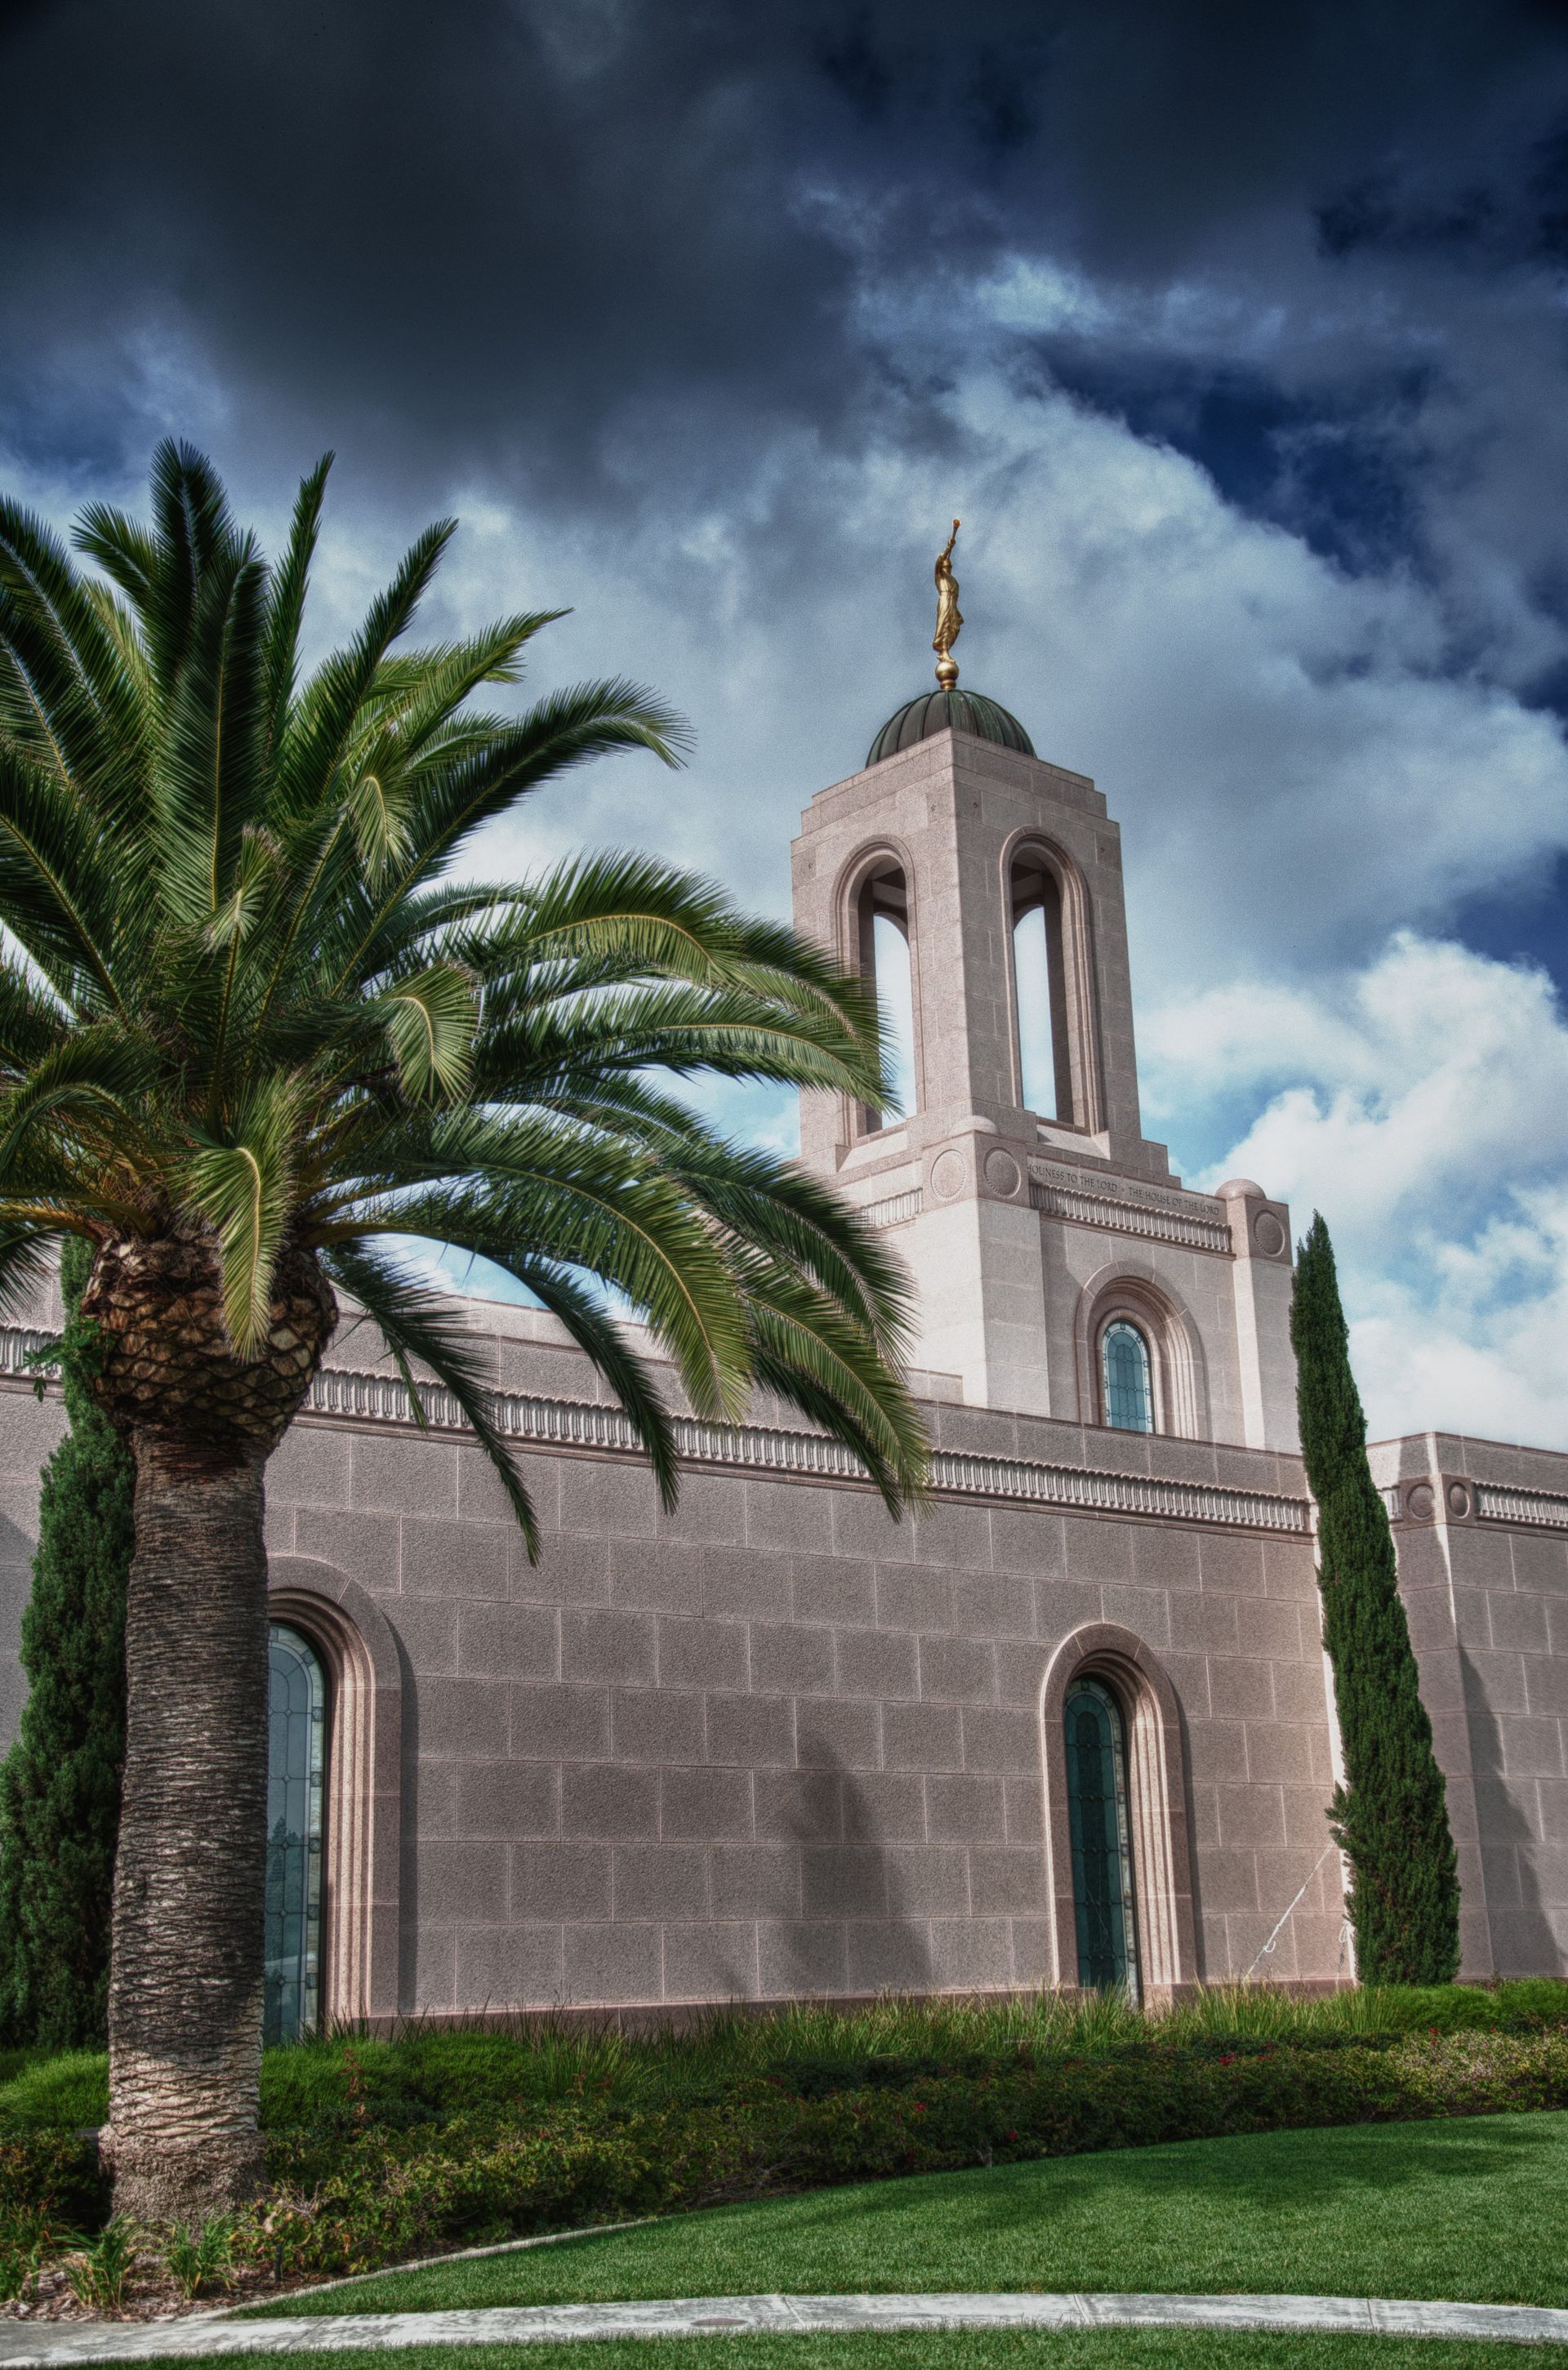 The Newport Beach California Temple during a storm, including the exterior of the temple.